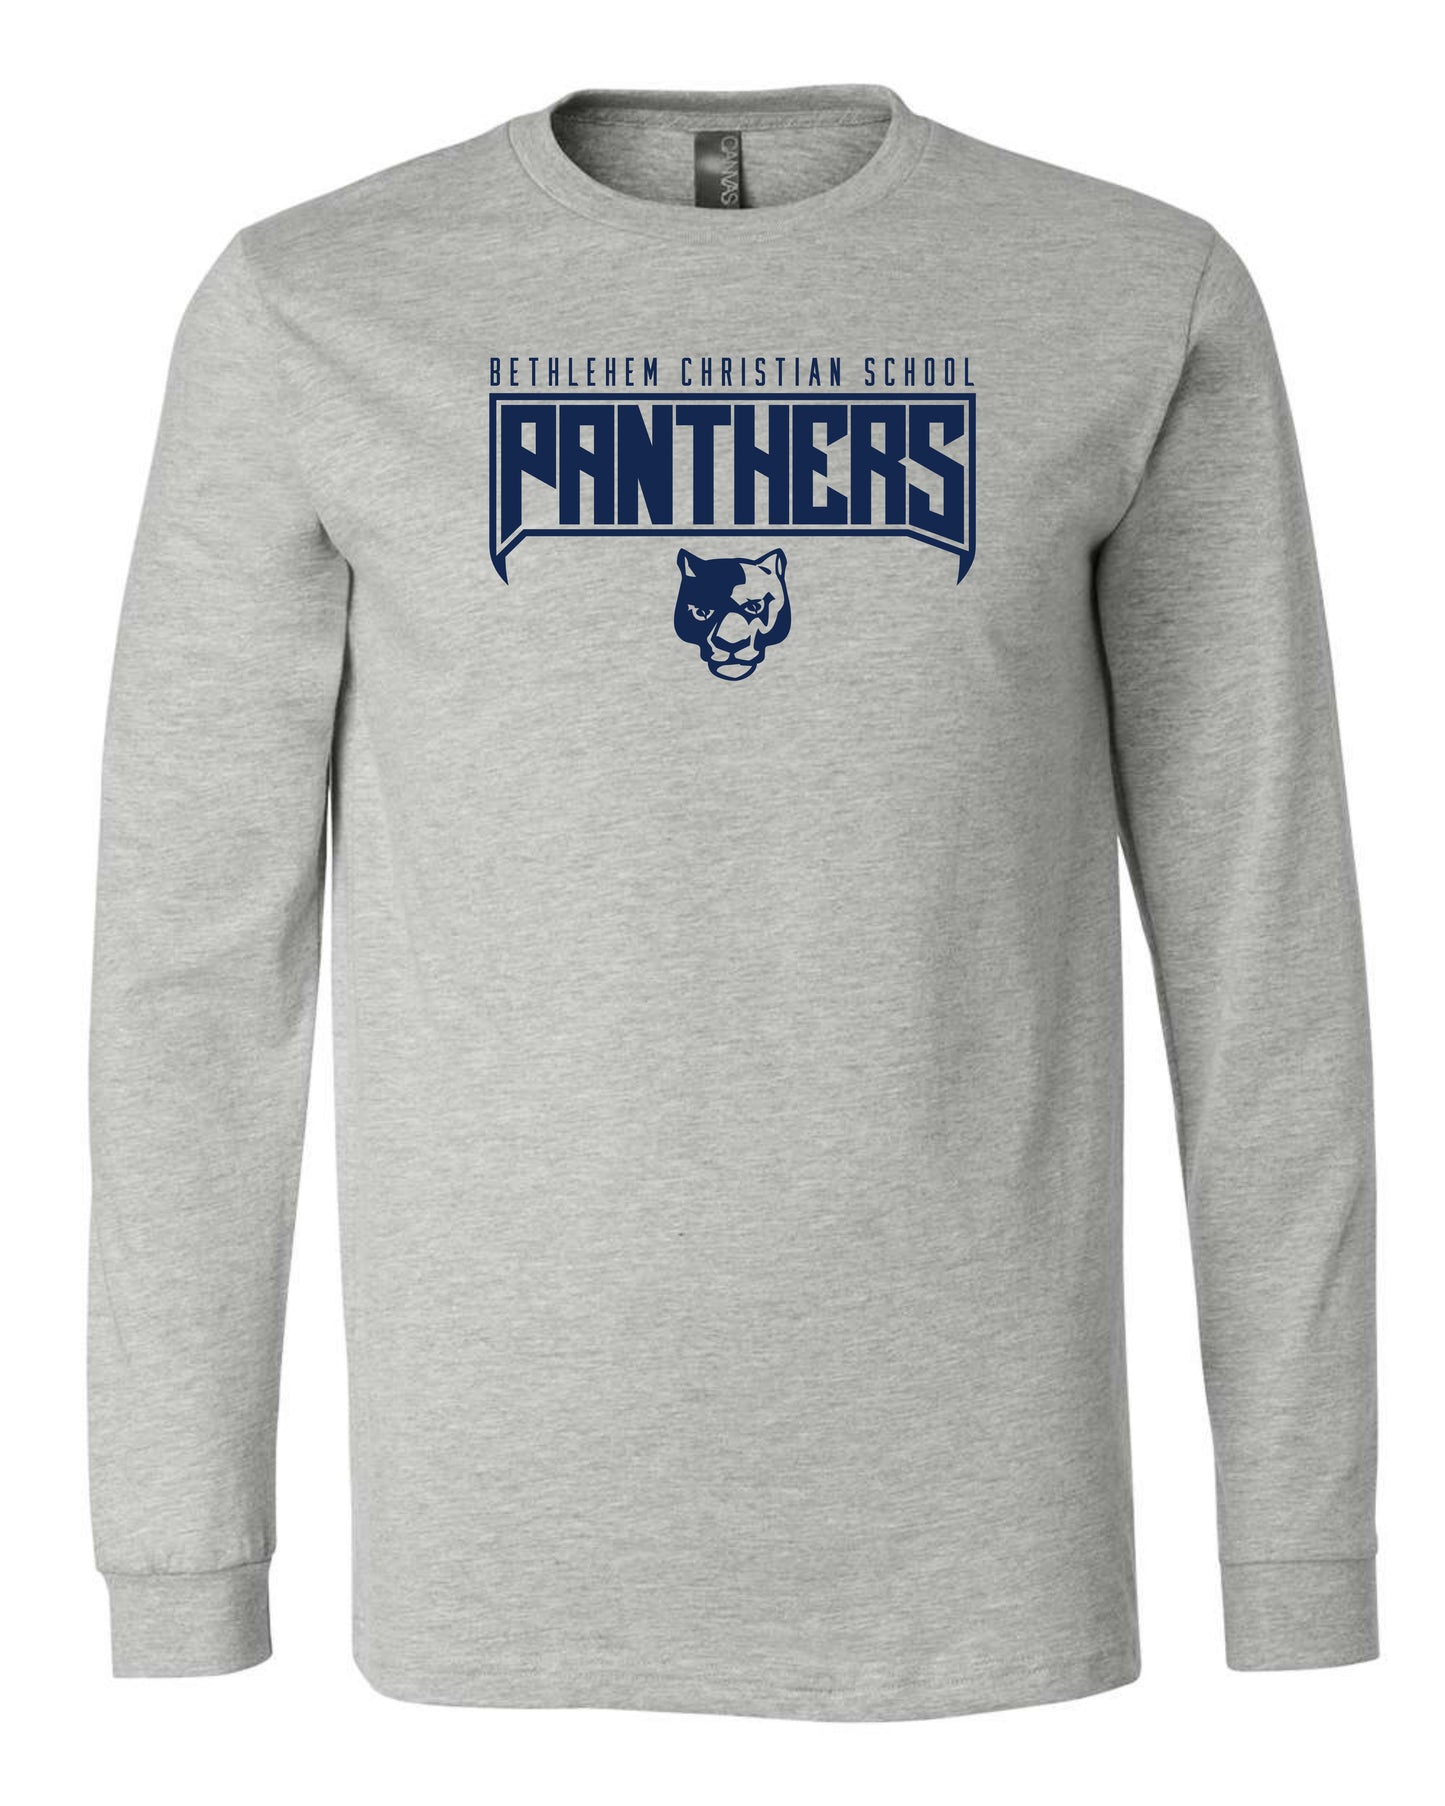 BCS Panthers Fangs - Adult Long Sleeve